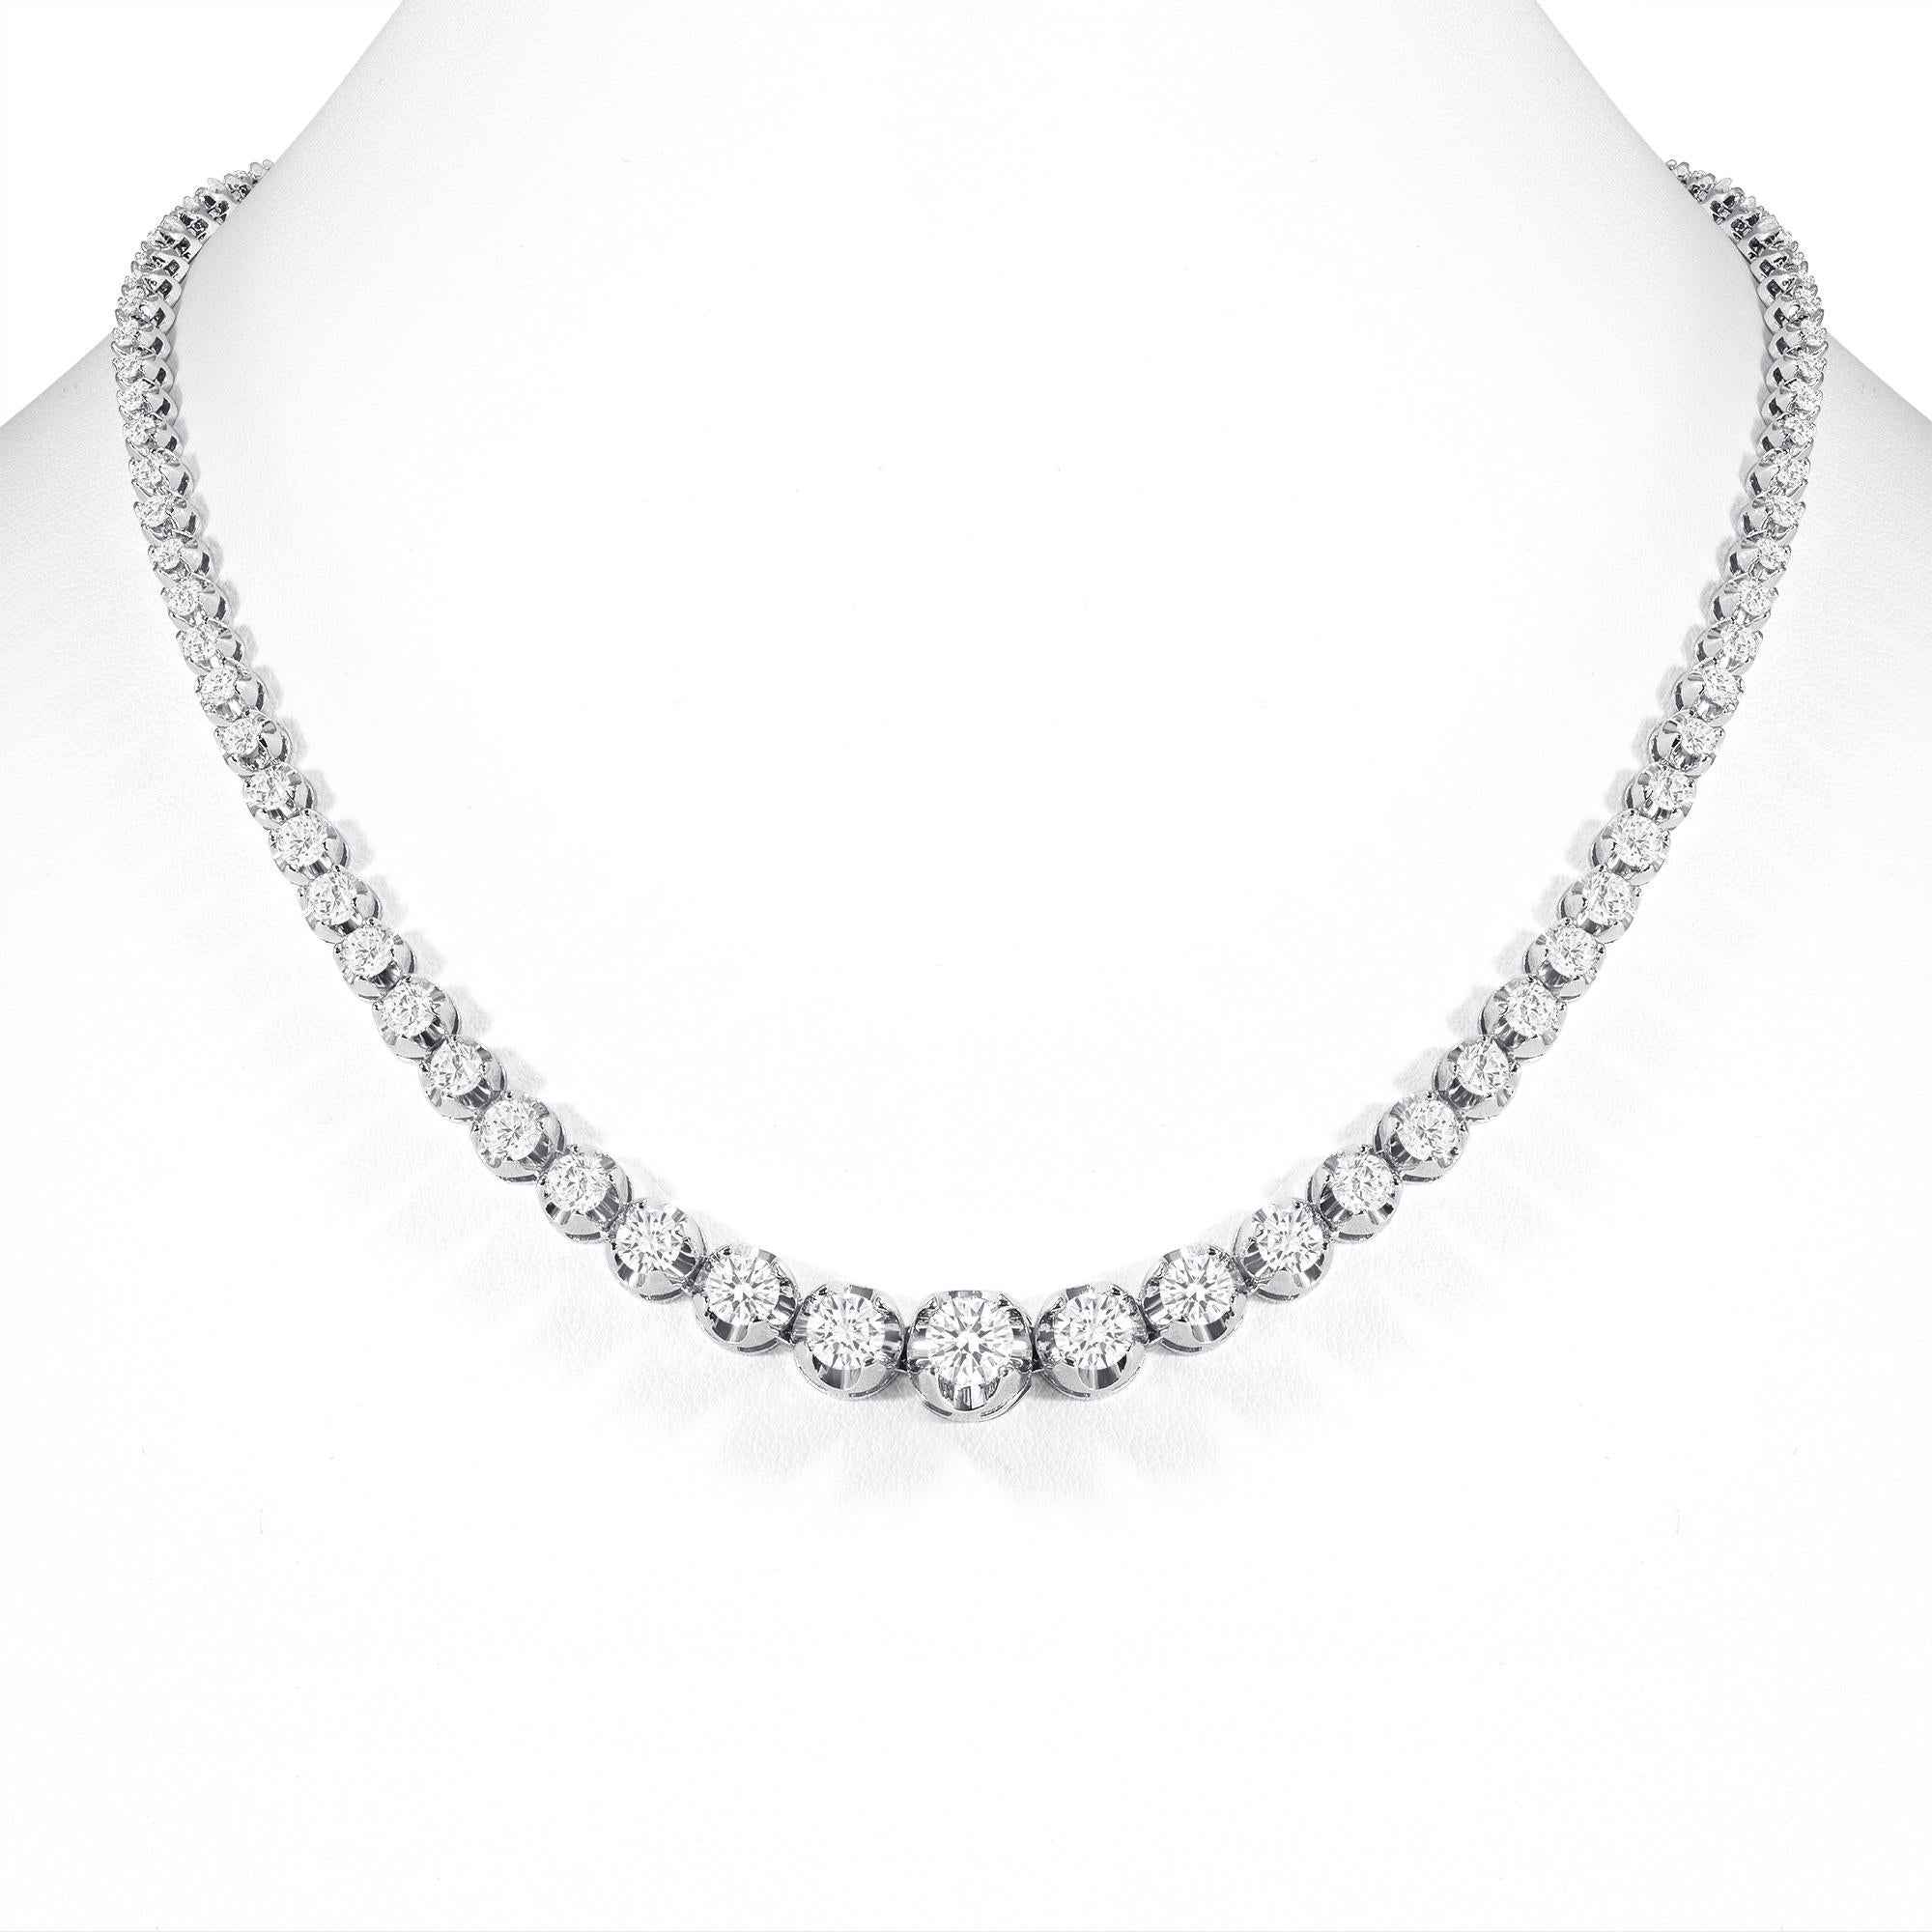 This finely made graduated necklace with beautiful round diamonds sits elegantly on any neck. 

Metal: 14k Gold
Diamond Cut: Round
Total Diamond Approx. Carats:  10ct
Diamond Clarity: VS
Diamond Color: F-G
Size: 16 inches
Color: White Gold
Included